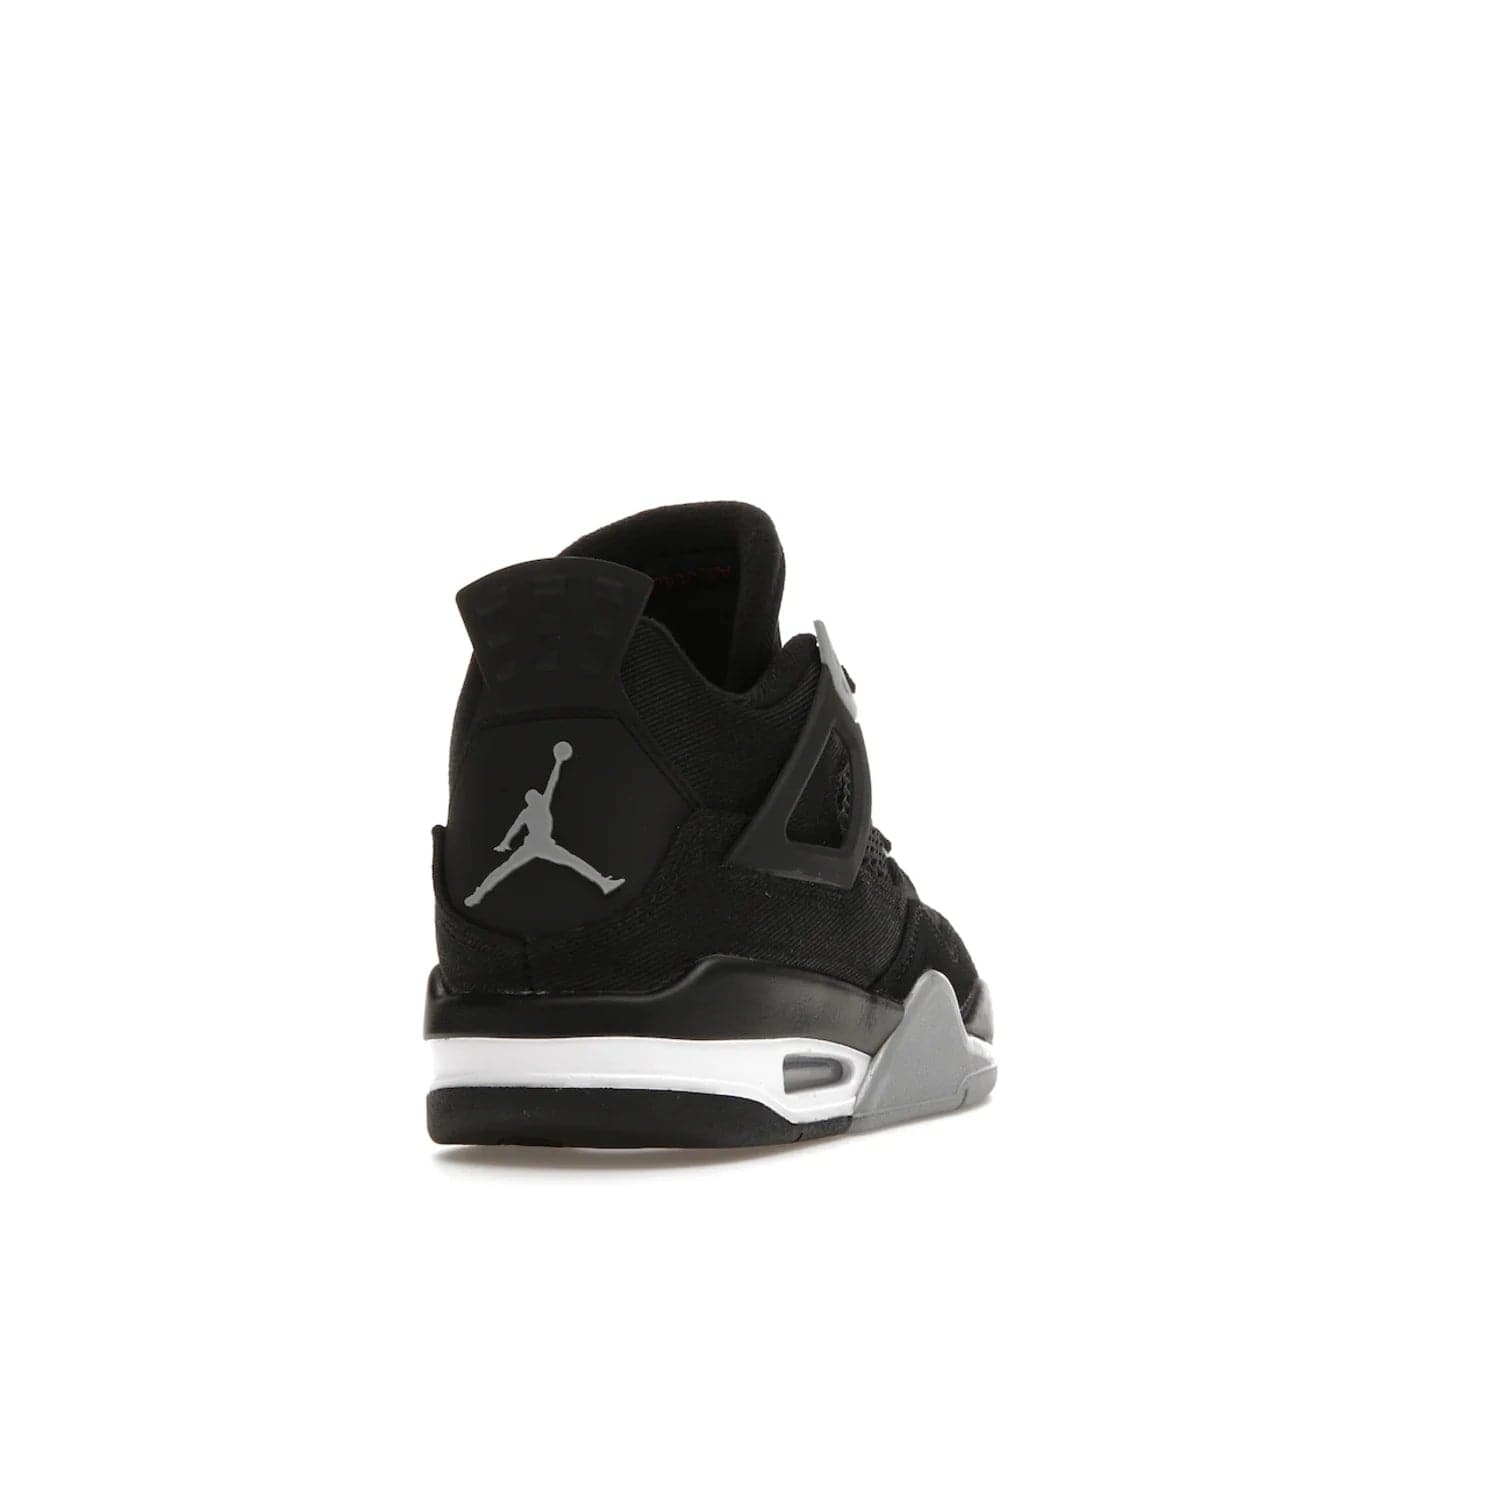 Jordan 4 Retro Black Canvas (GS) - Image 30 - Only at www.BallersClubKickz.com - Premium Air Jordan 4 Retro Black Canvas in grade-schooler's catalog. Featuring black suede canvas upper, grey molding, accents in red, white midsole, woven Jumpman tag, & visible AIR cushioning. Releasing Oct. 1, 2022.